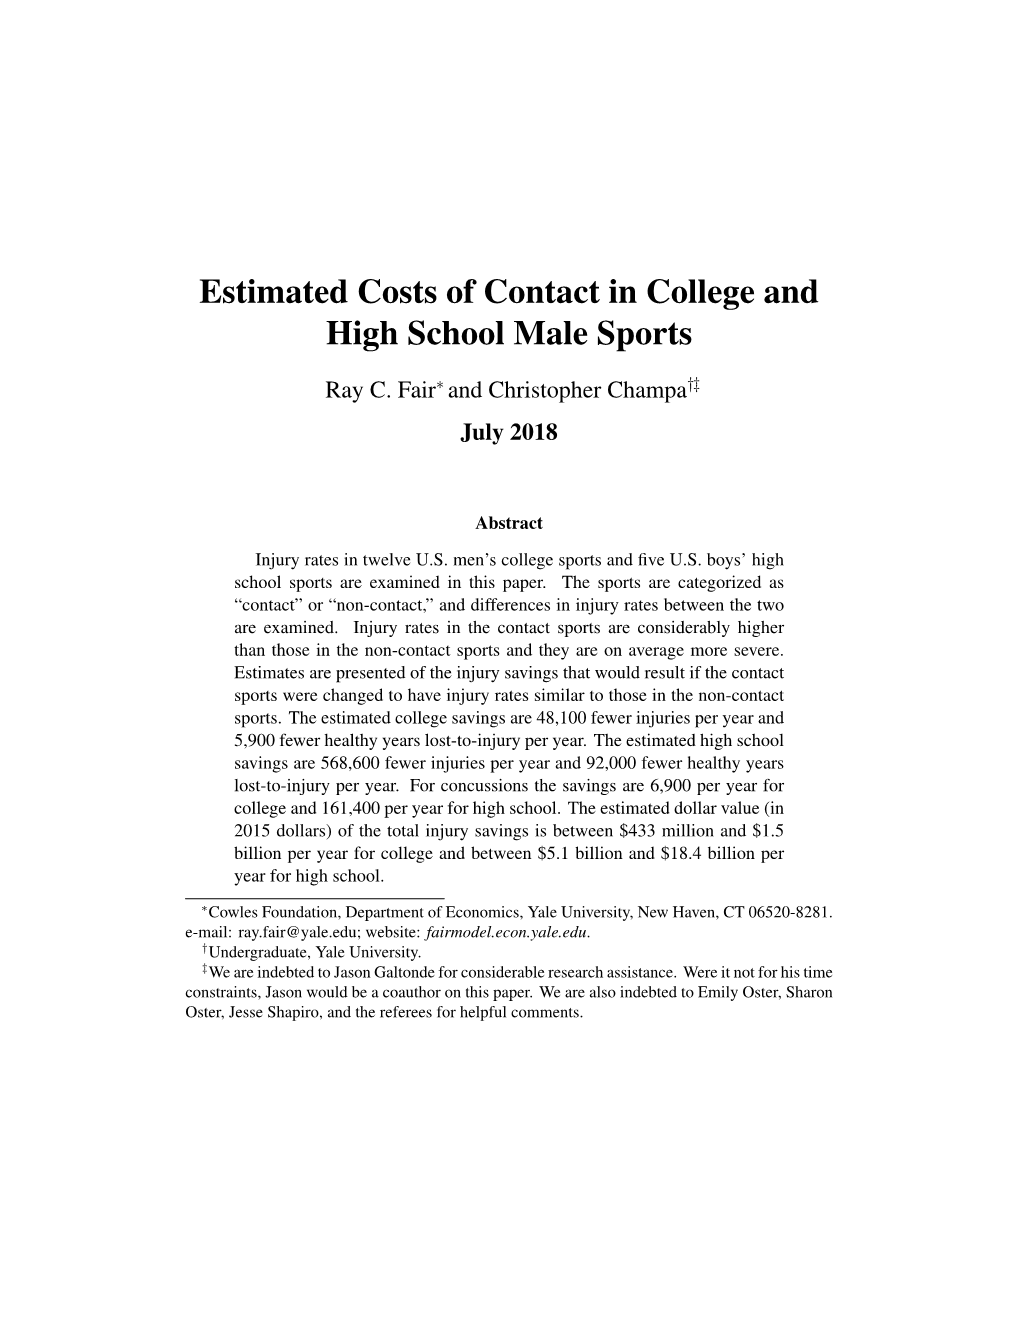 Estimated Costs of Contact in College and High School Male Sports